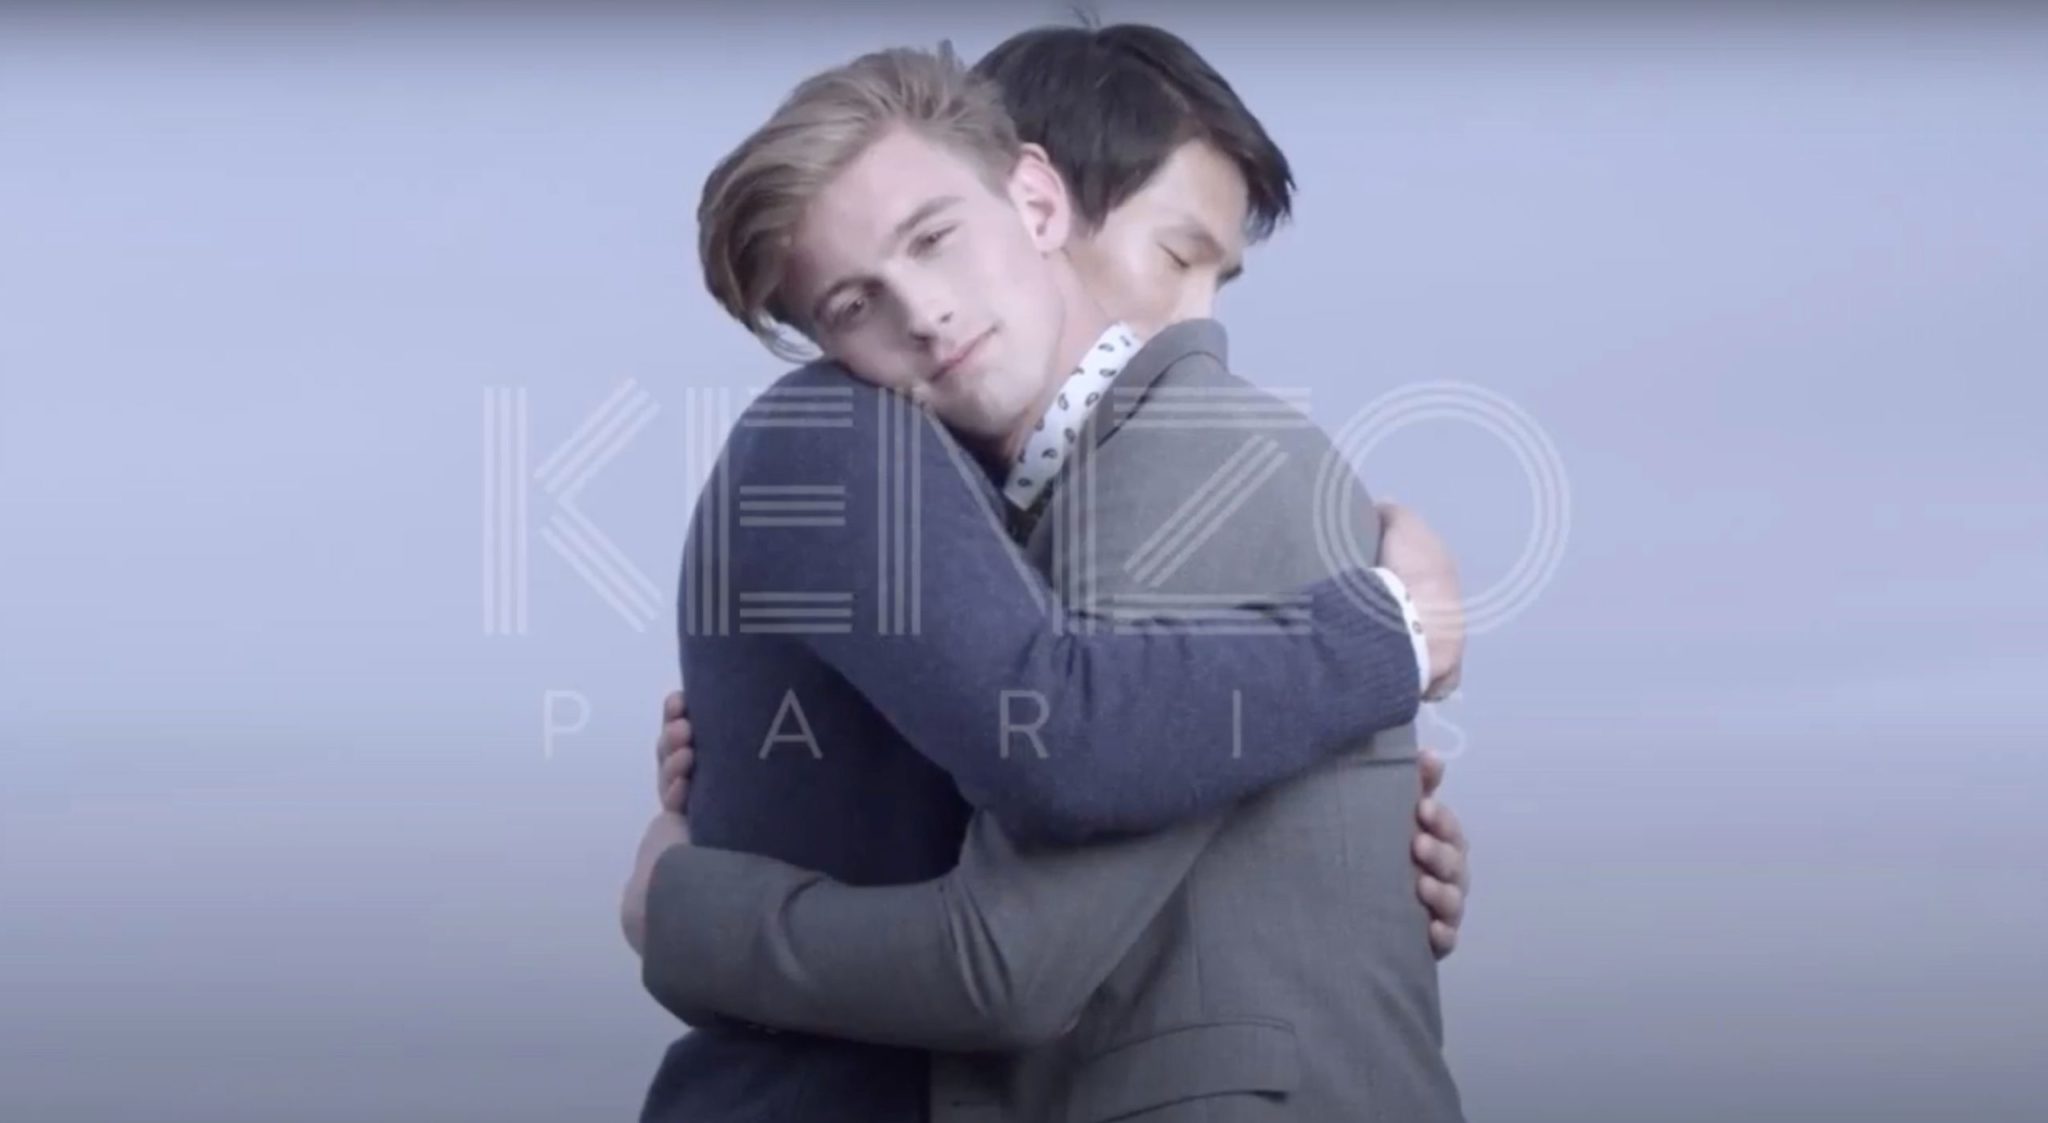 Two men embrace on a set with a large watermark that read 